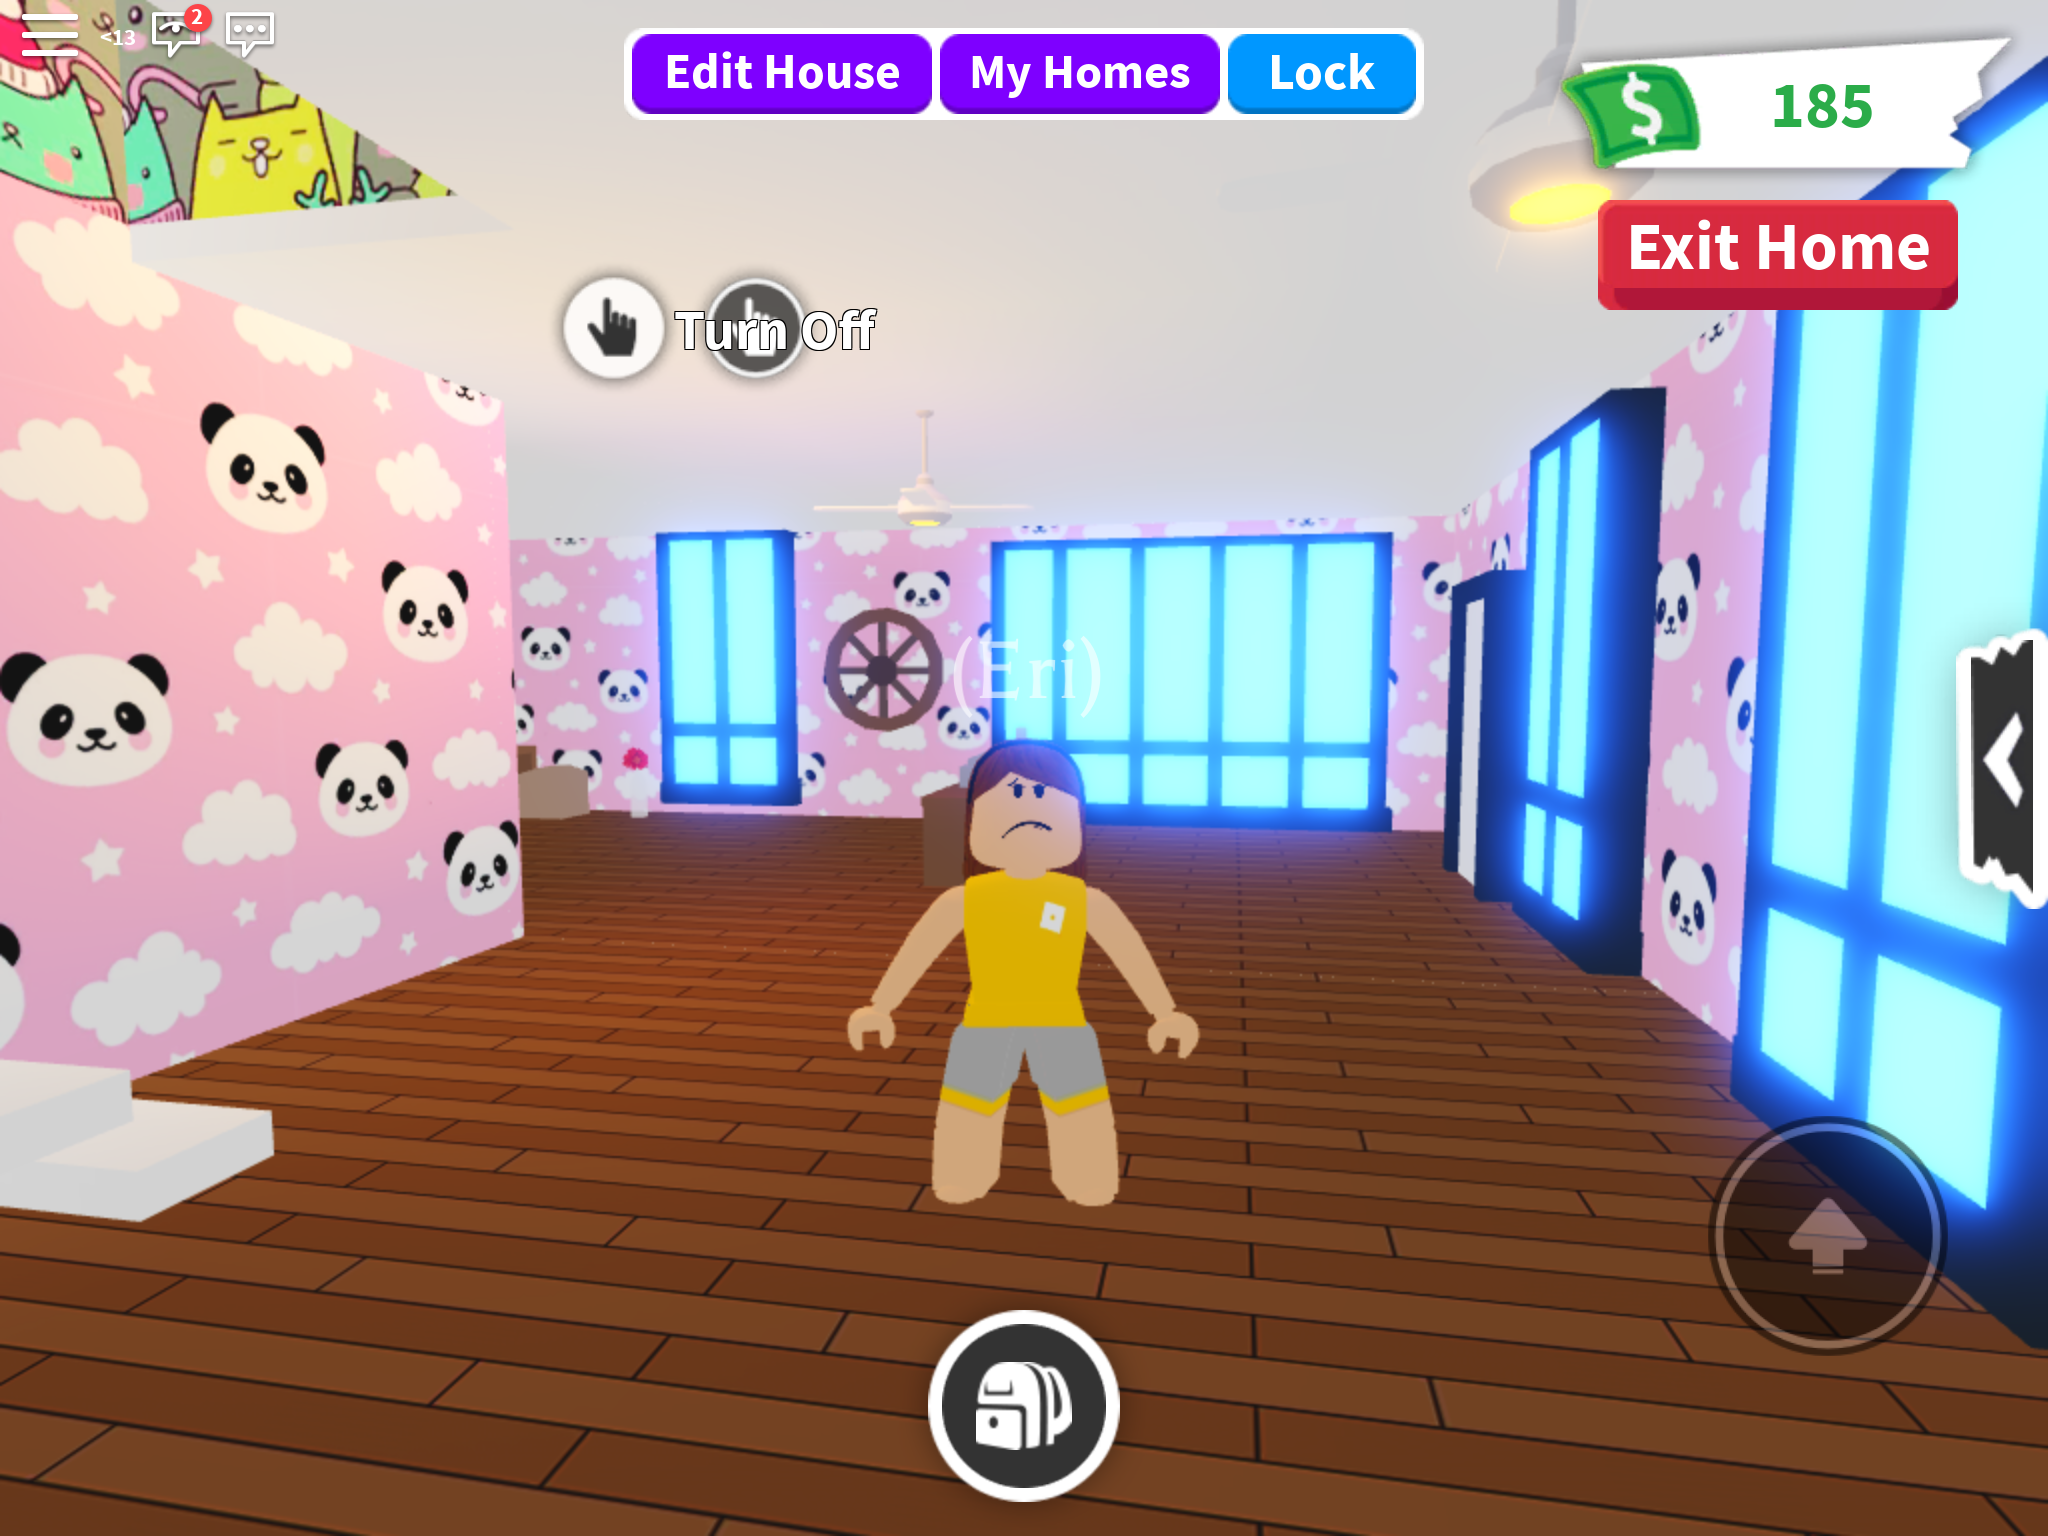 Cool Outfits Of Adopt Me Roblox